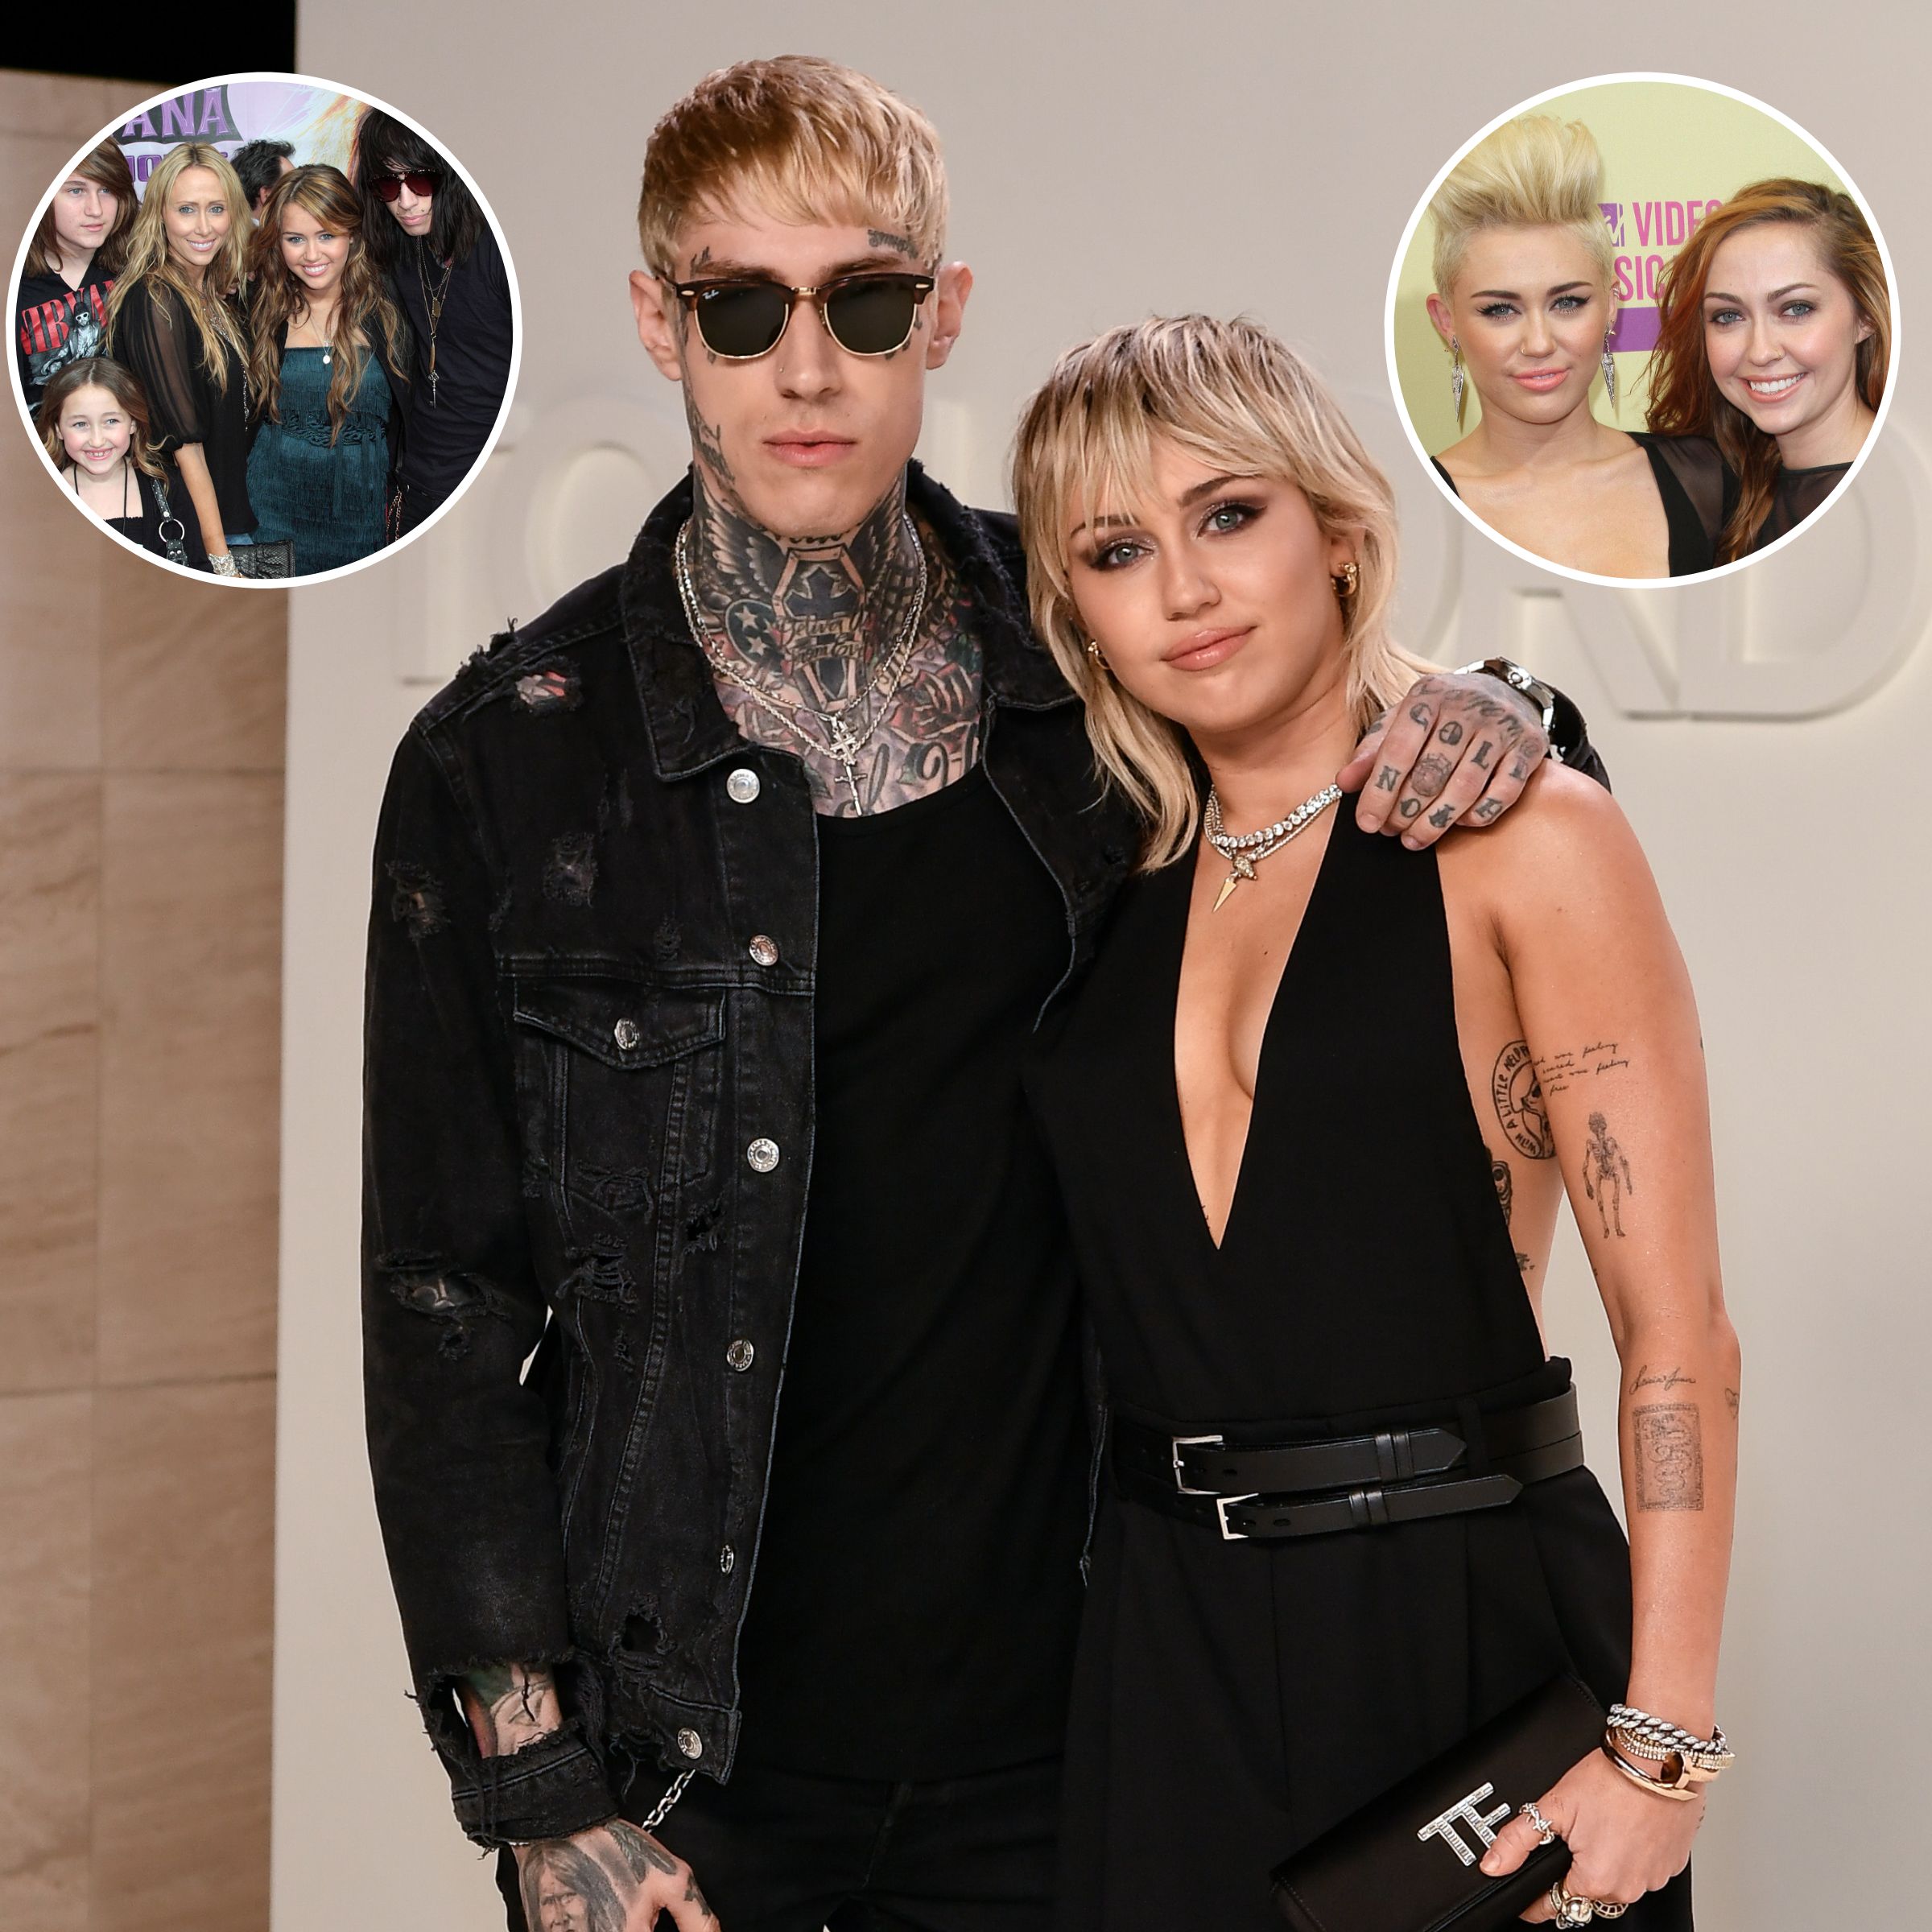 Miley Cyrus Sibling Guide: Brothers, Sister, Family Members